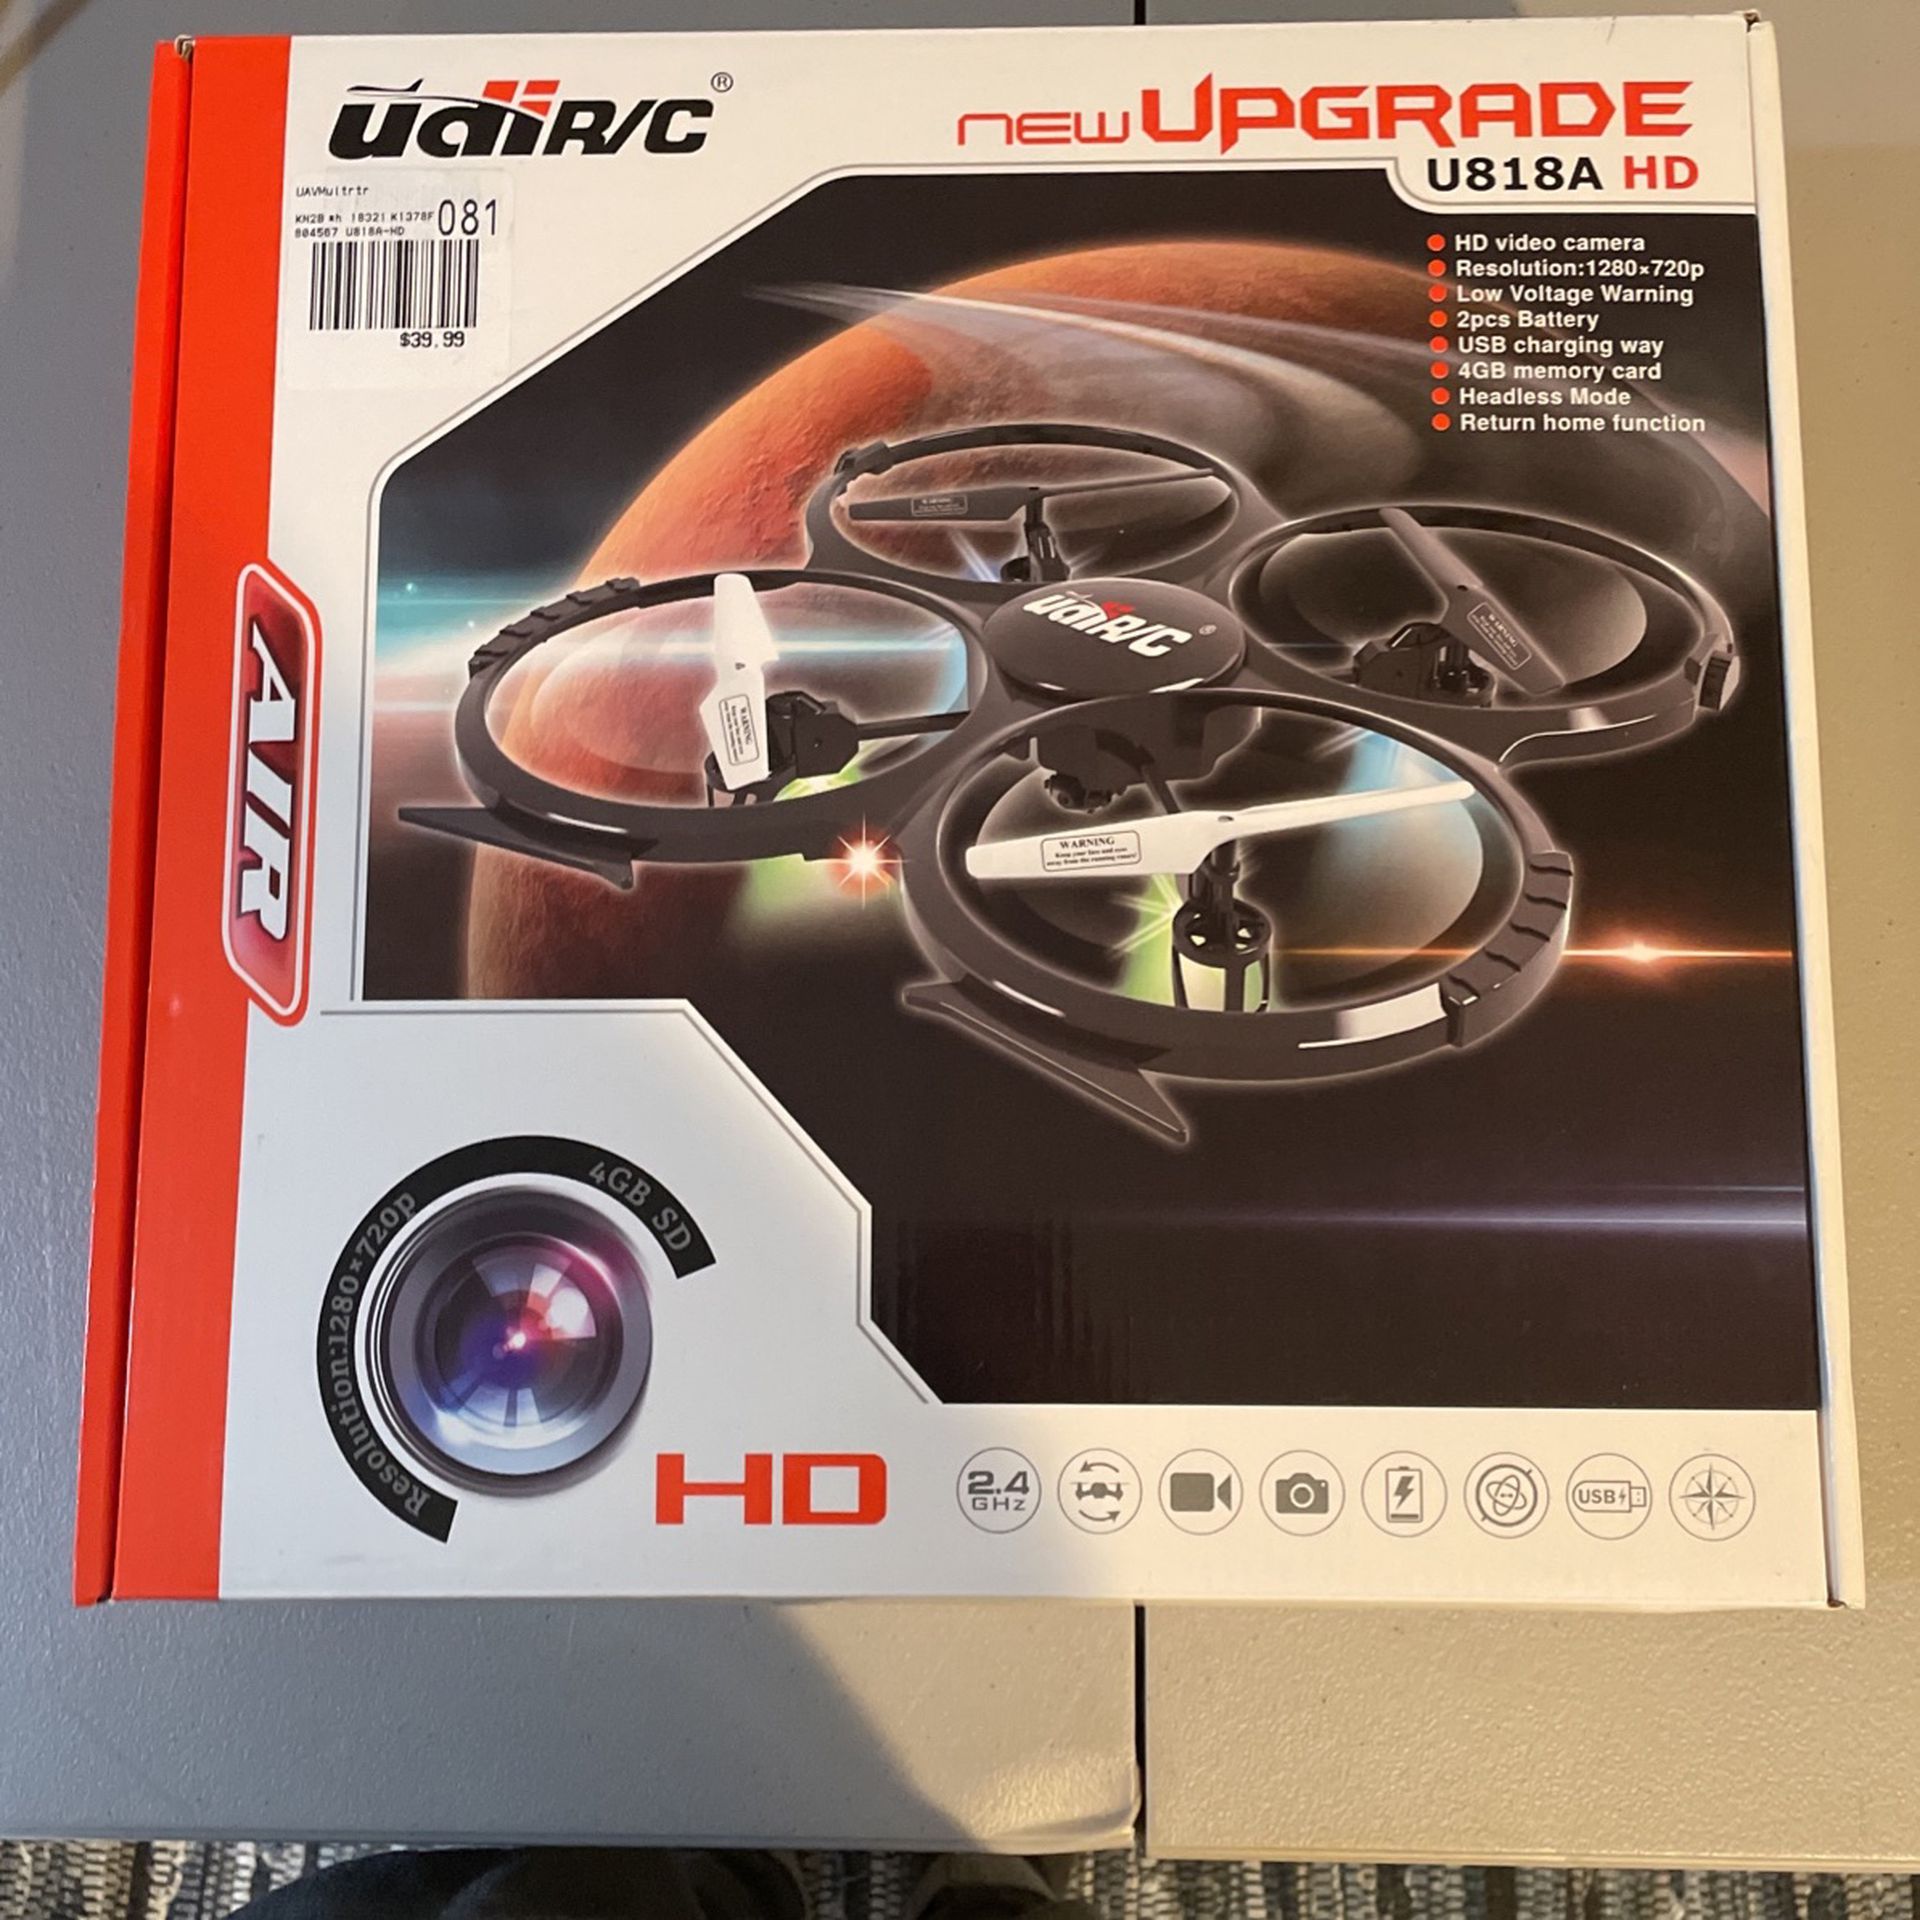 UDI RC 818A HD Drone Quadcopter with 720p HD Camera Headless Mode With Return to Home Function